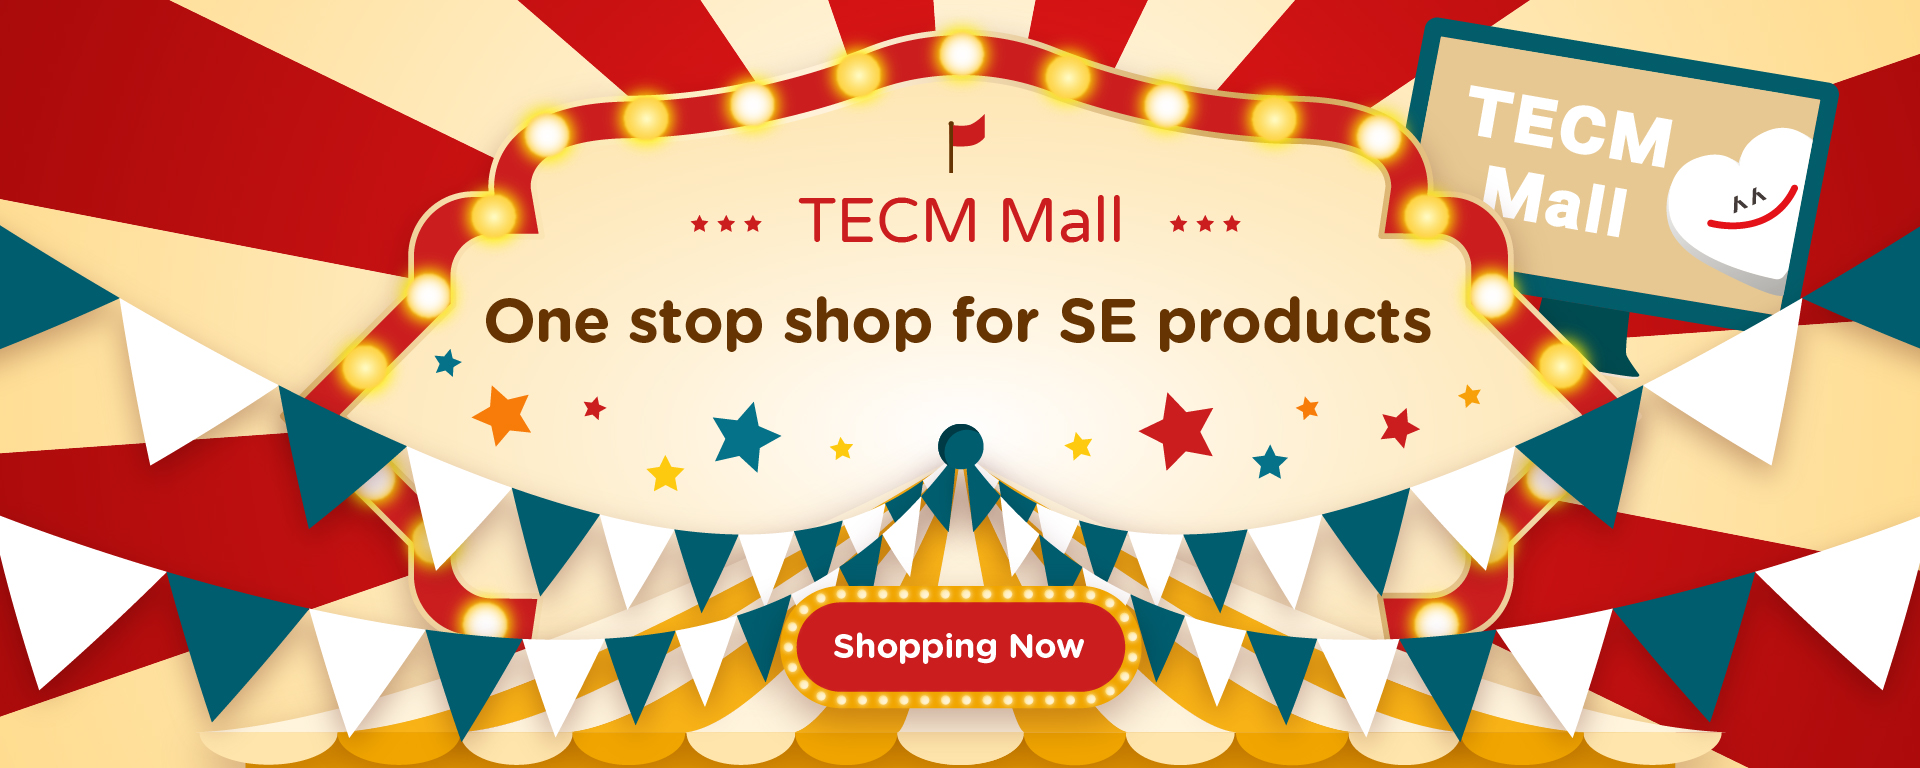 TECM Mall One stop shop for SE products